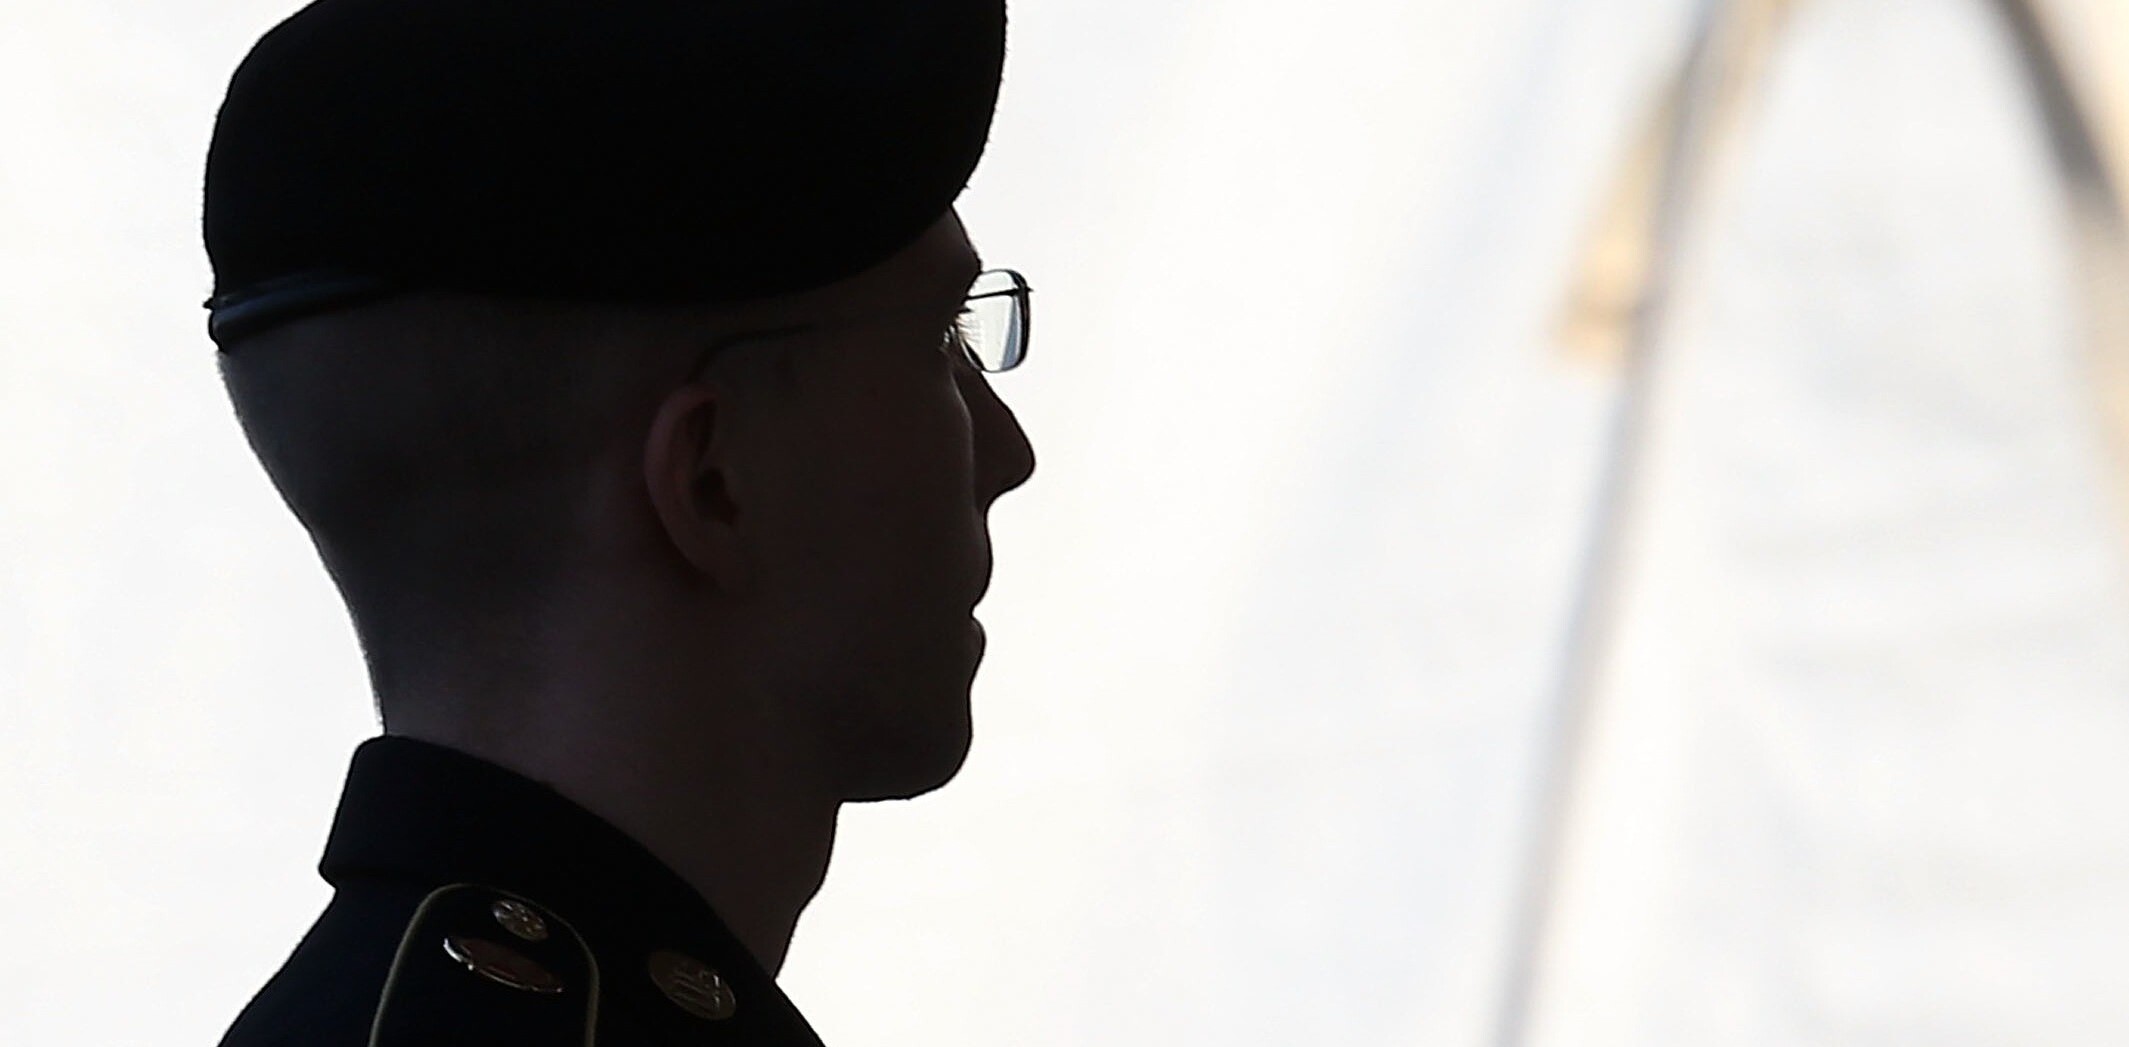 Bradley Manning apologizes for hurting the US